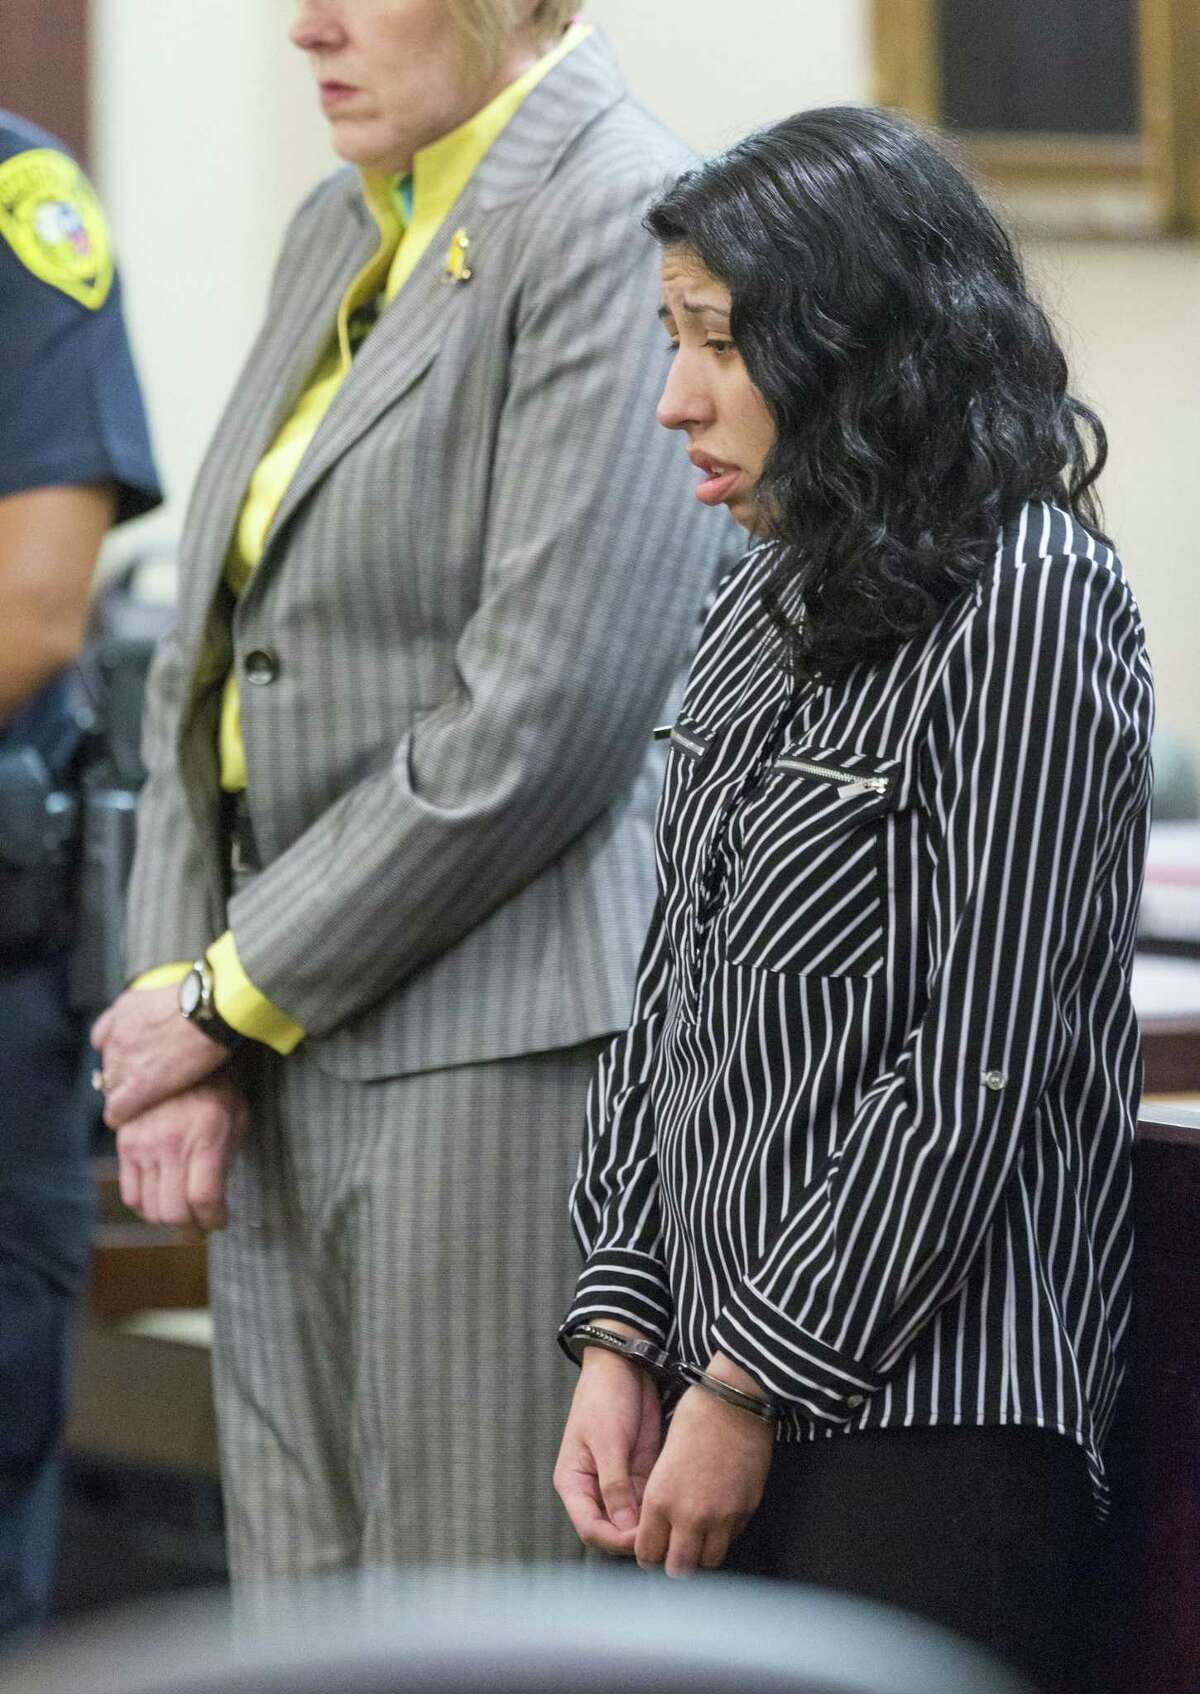 Antoinette Martinez listens Tuesday, Sept. 19, 2017 to victim impact statements after she was convicted of two counts of capital murder for killing Xavier Cordero, Jr. and Steven Rendon in 2014. Prosecutors did not seek the death penalty so Martinez was automatically given life without parole.